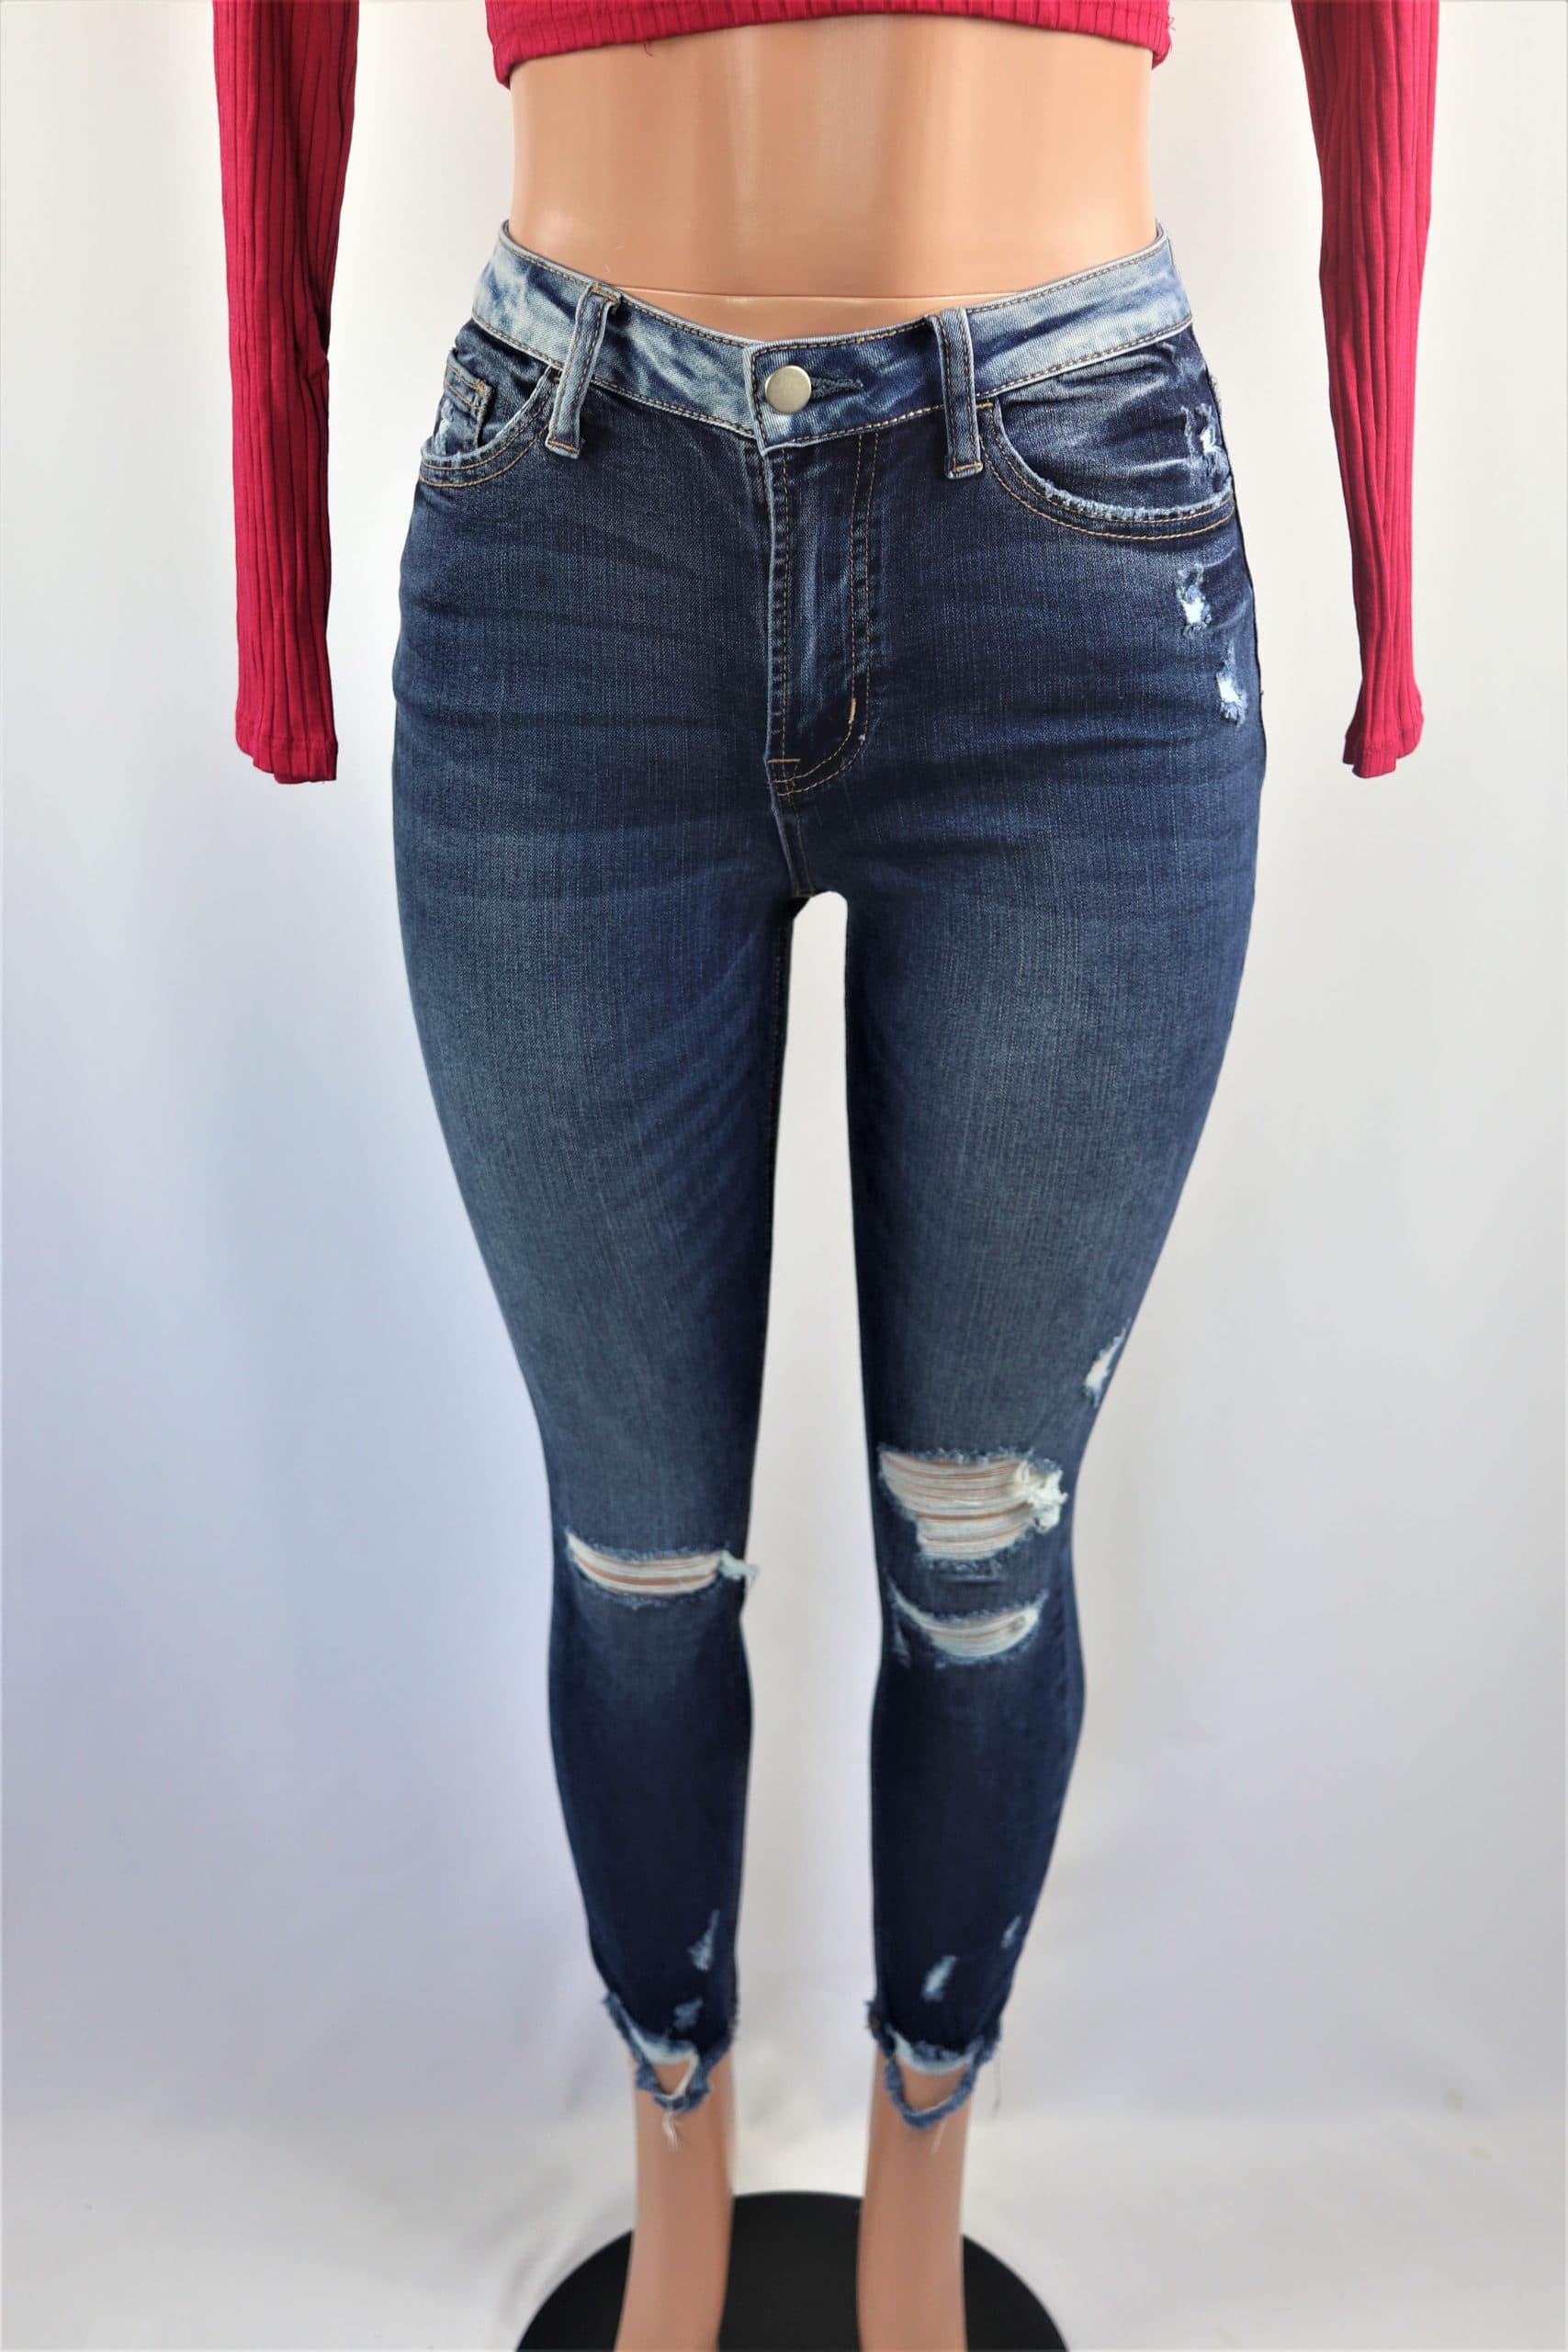 Tarik Ankle Jeans - Dark wash high waist ripped skinny faded ankle jeans.